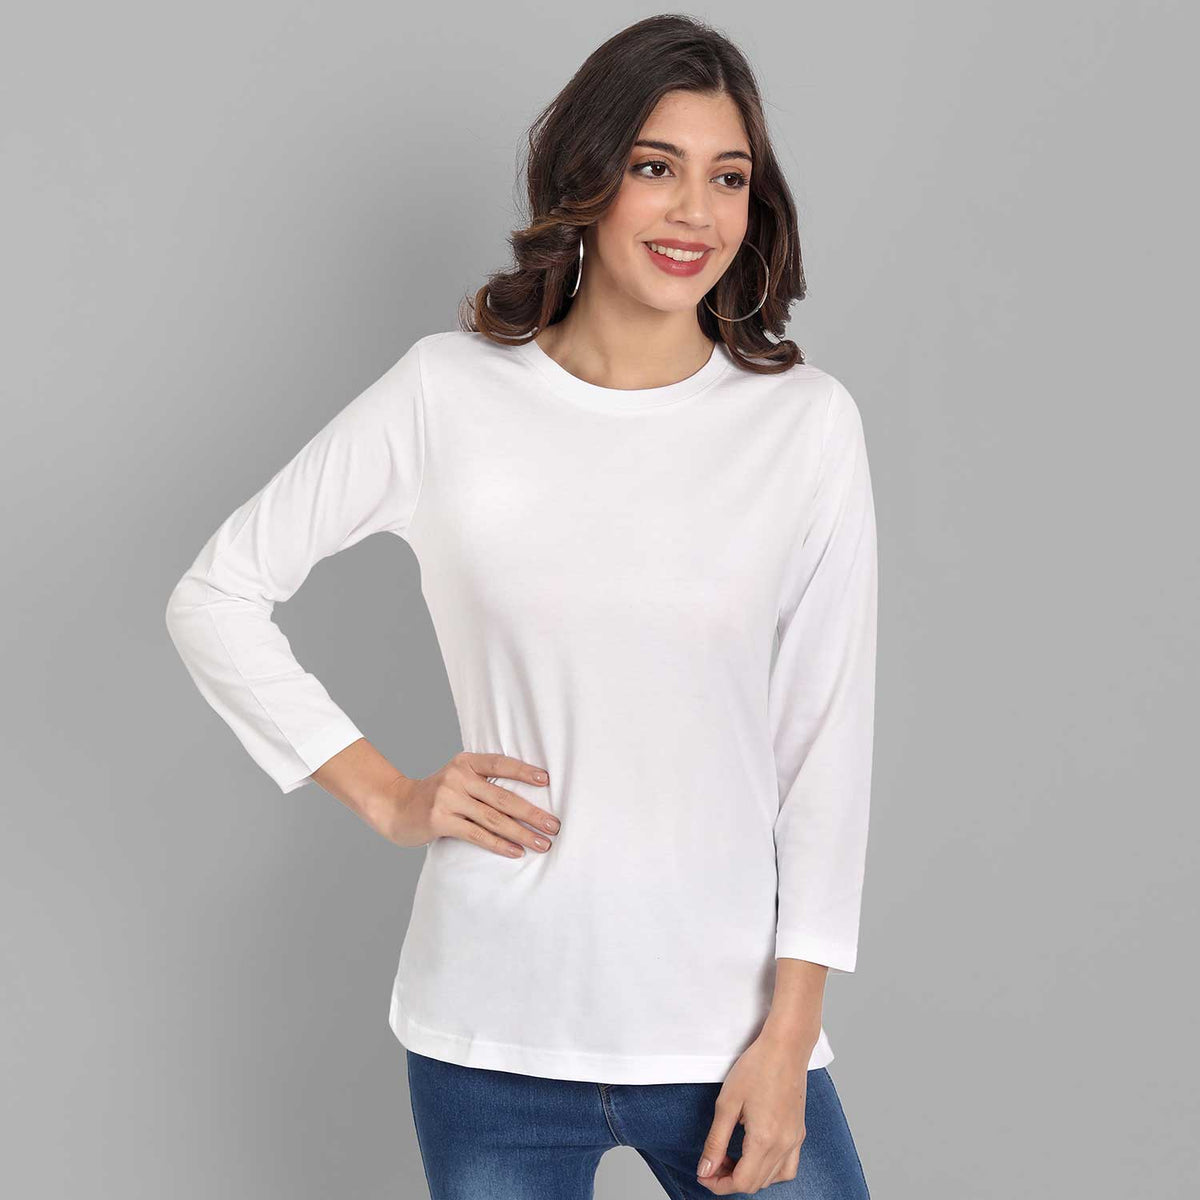 Buy Women's Sleeve T-Shirts online in India